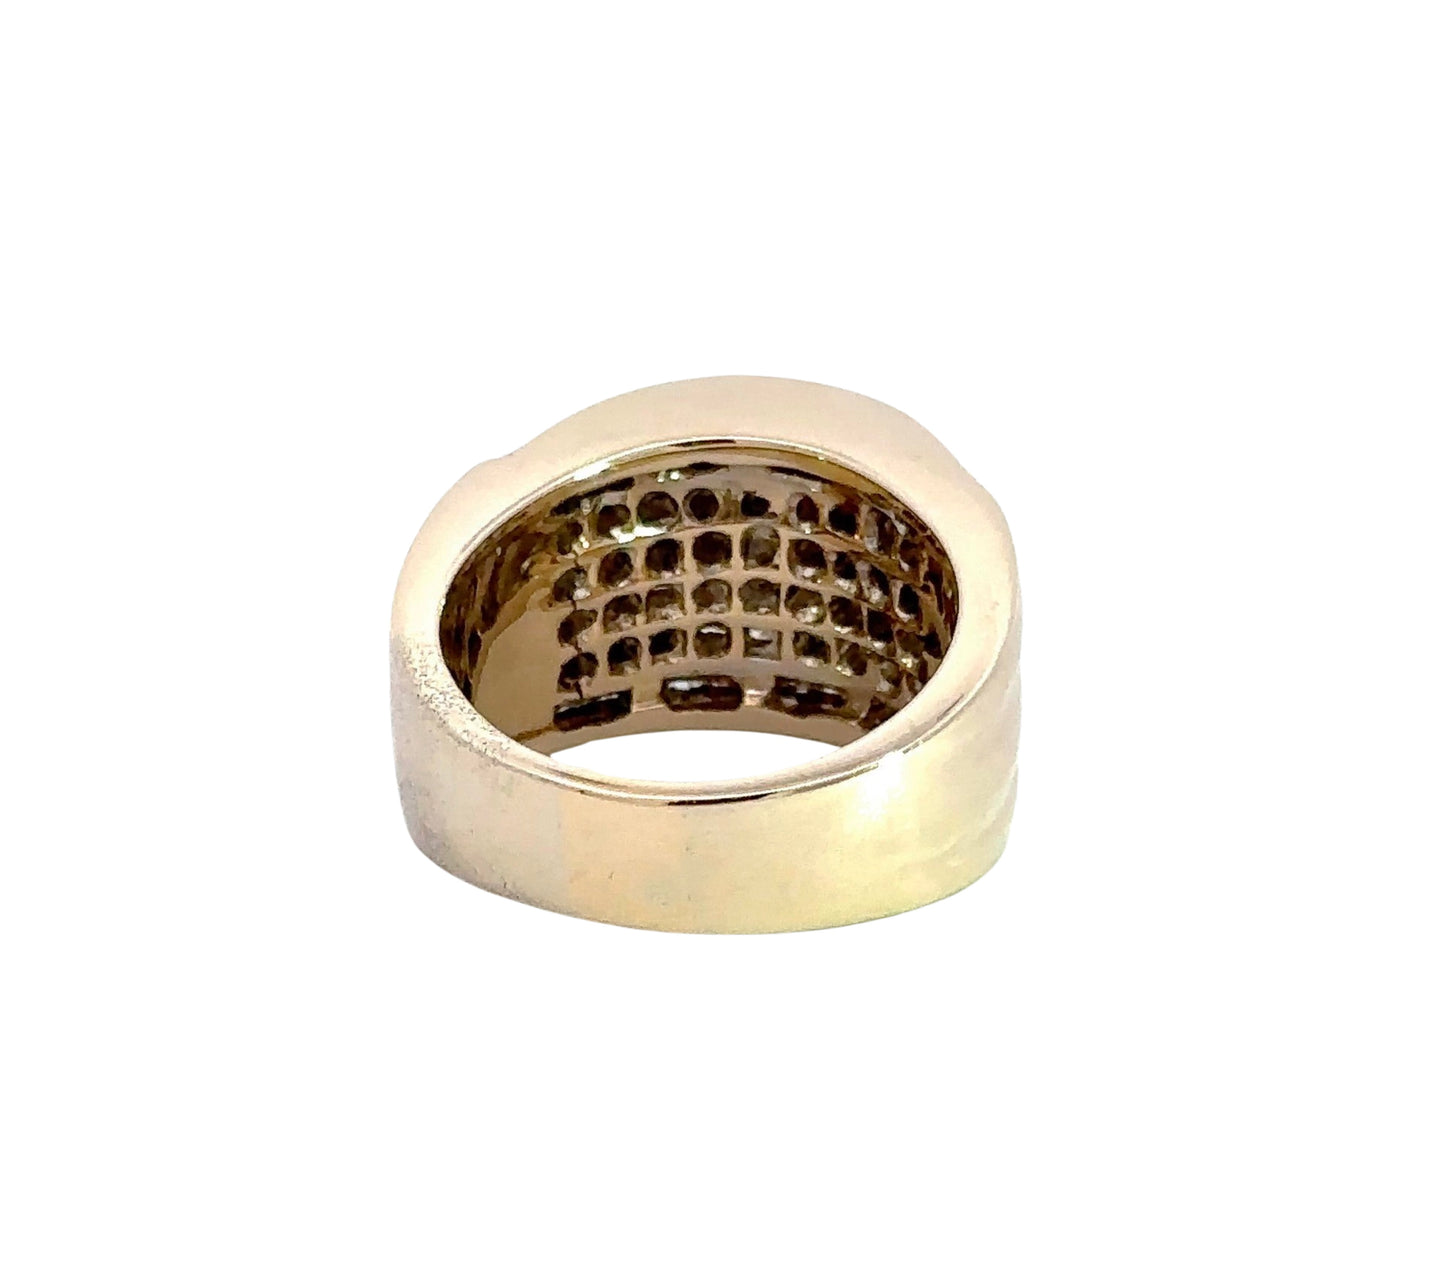 back of white gold ring with scratches on gold